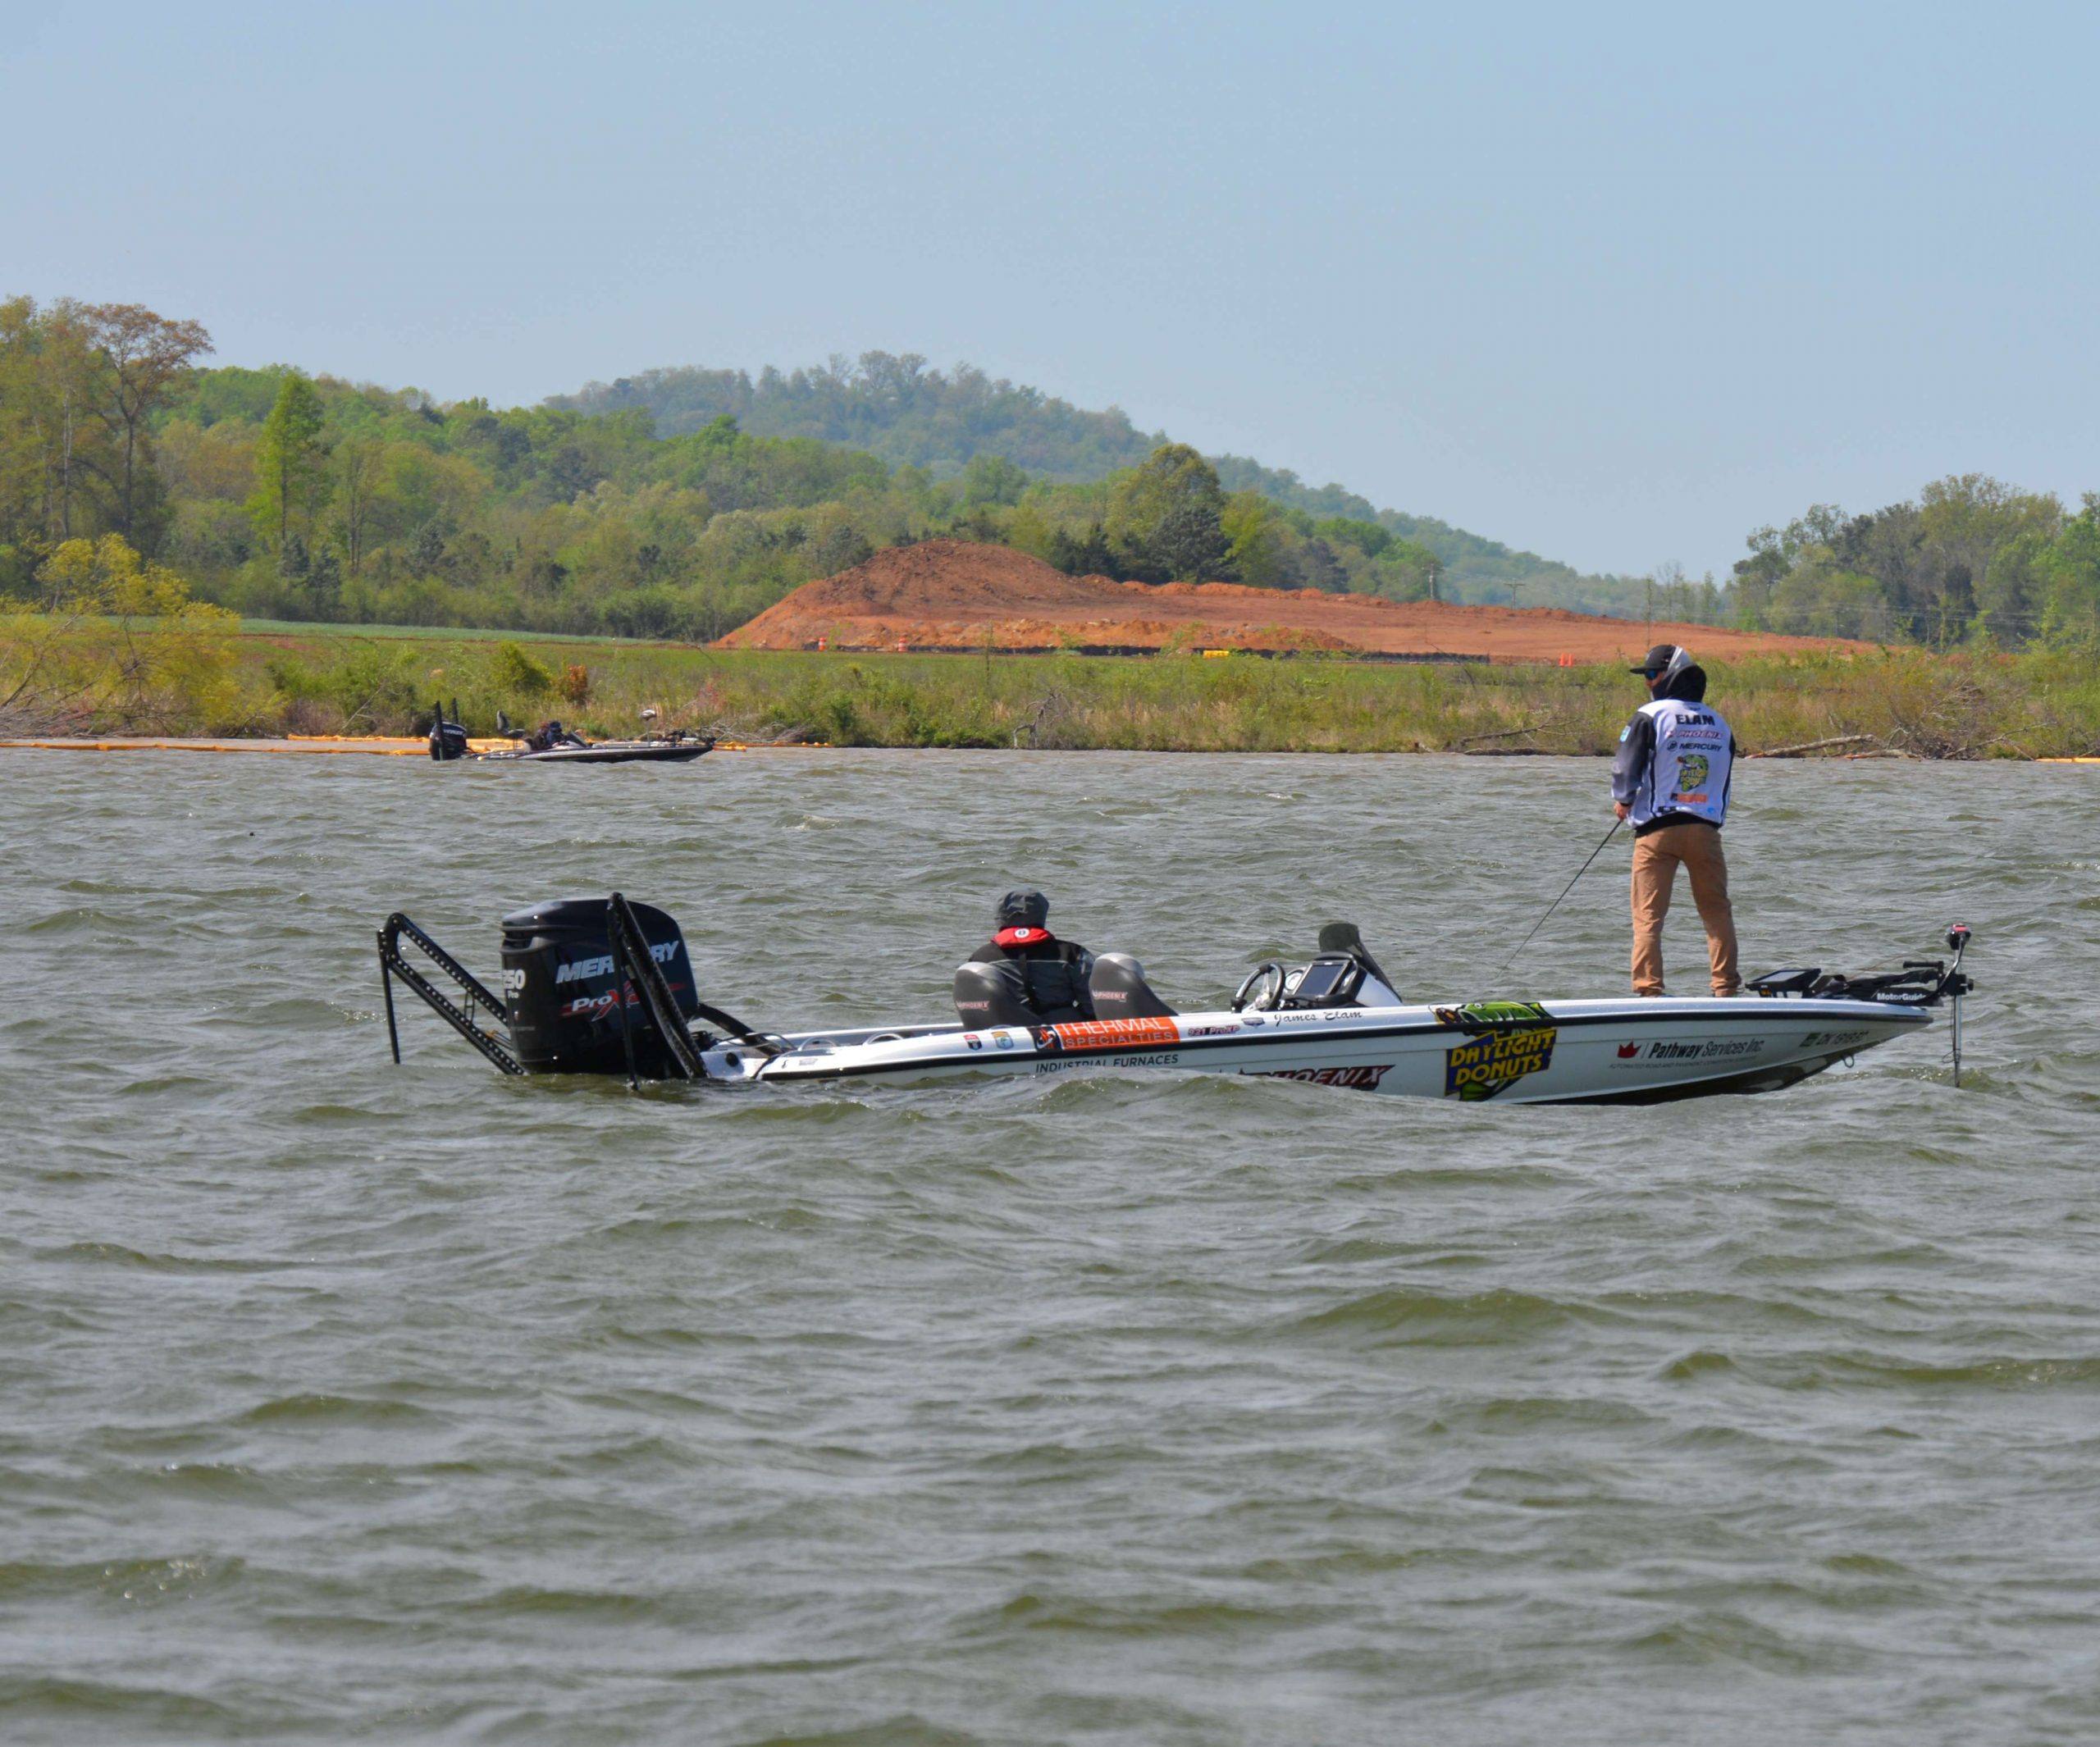 Elam is trying to find another bass like the 8-8 monster he caught on Day 1.